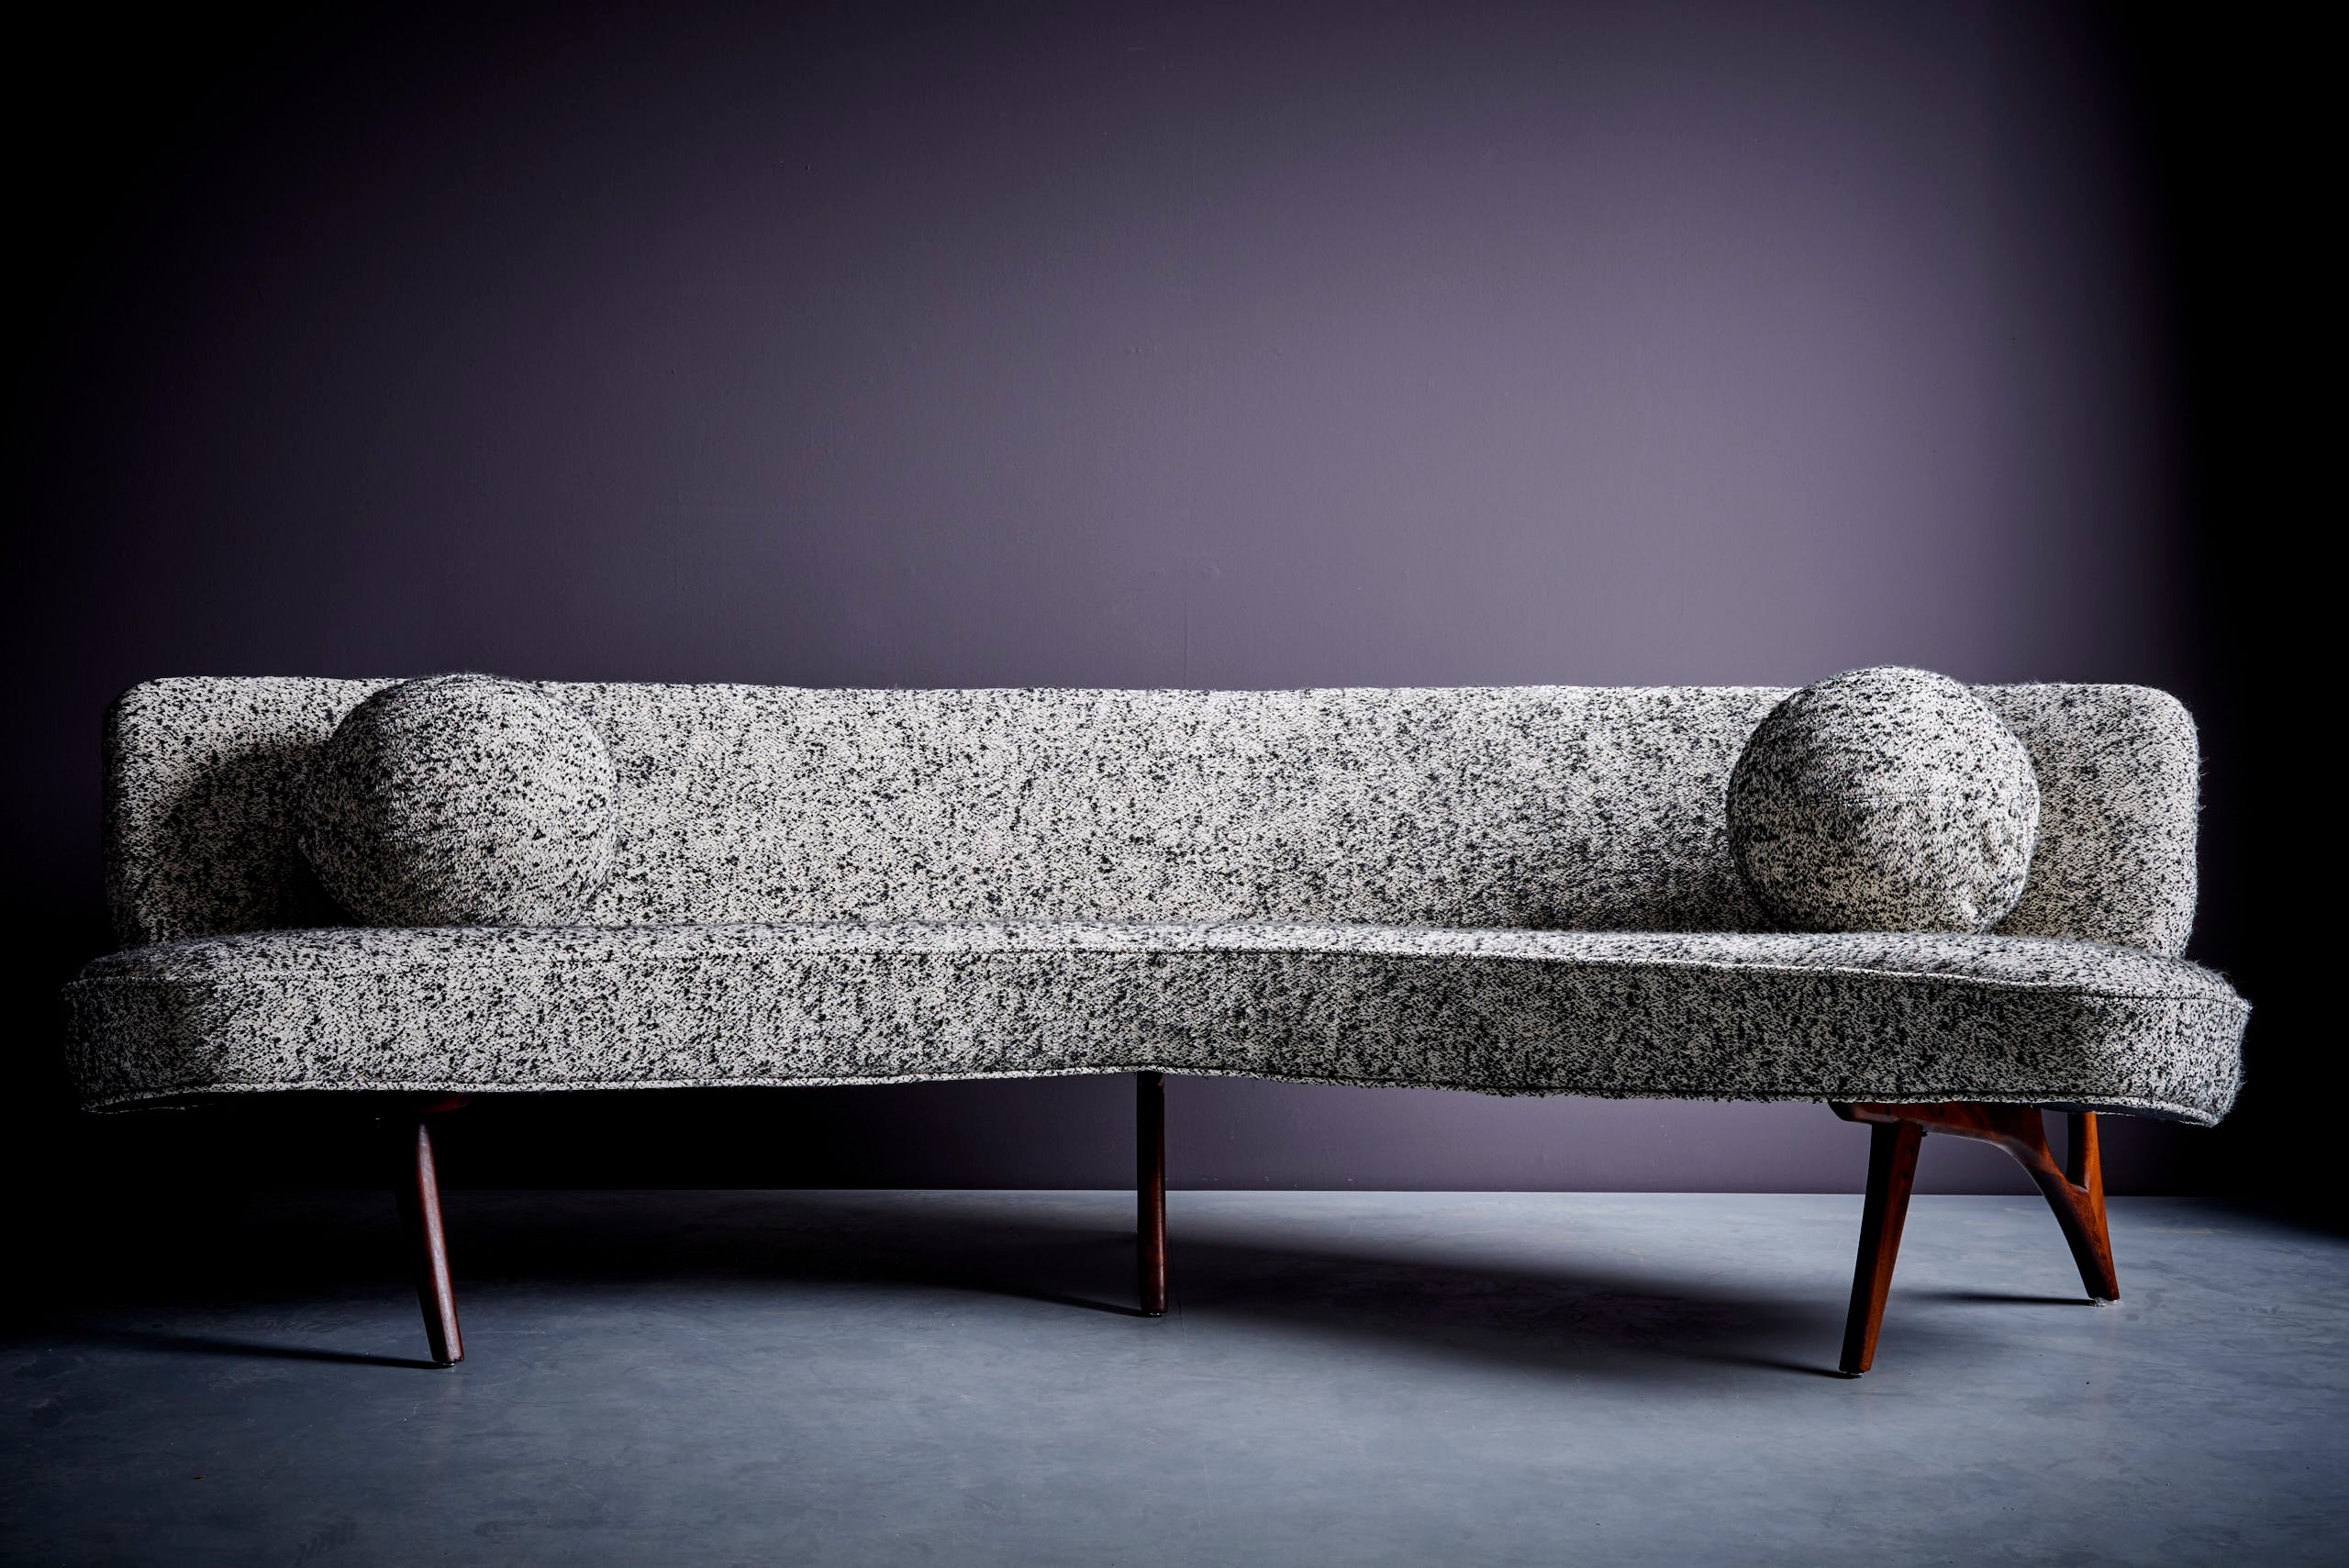 Curved 1950s sofa with sculptural legs in the manner of Vladimir Kagan. Purchased from the original owners, who bought the sofa from an interiors gallery in a villa in Hamburg, Germany.  The sofa has been restored with new upholstery. 
